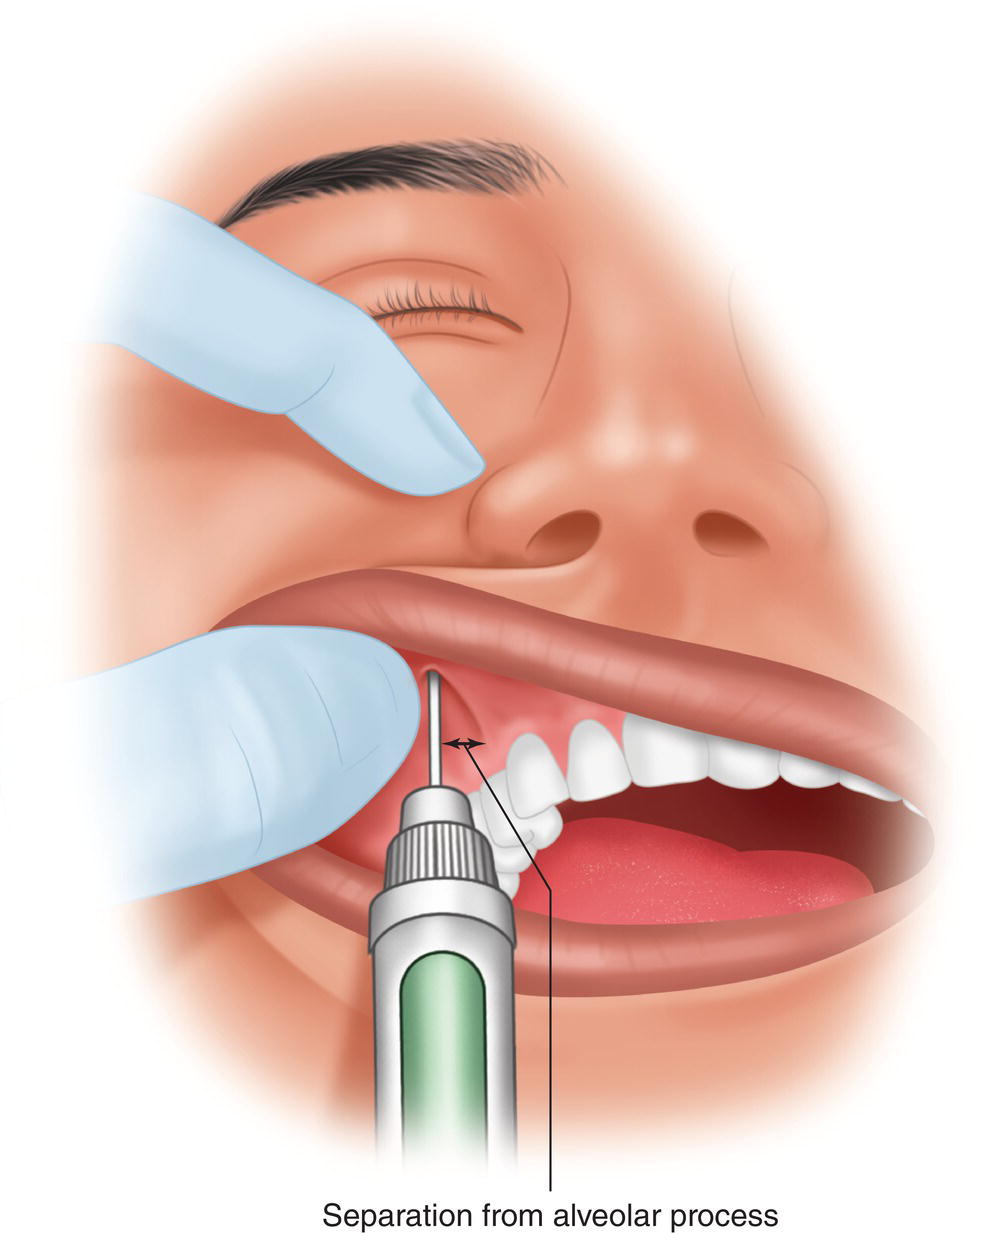 An illustration of needle insertion by holding the upper lip and infraorbital foramen.